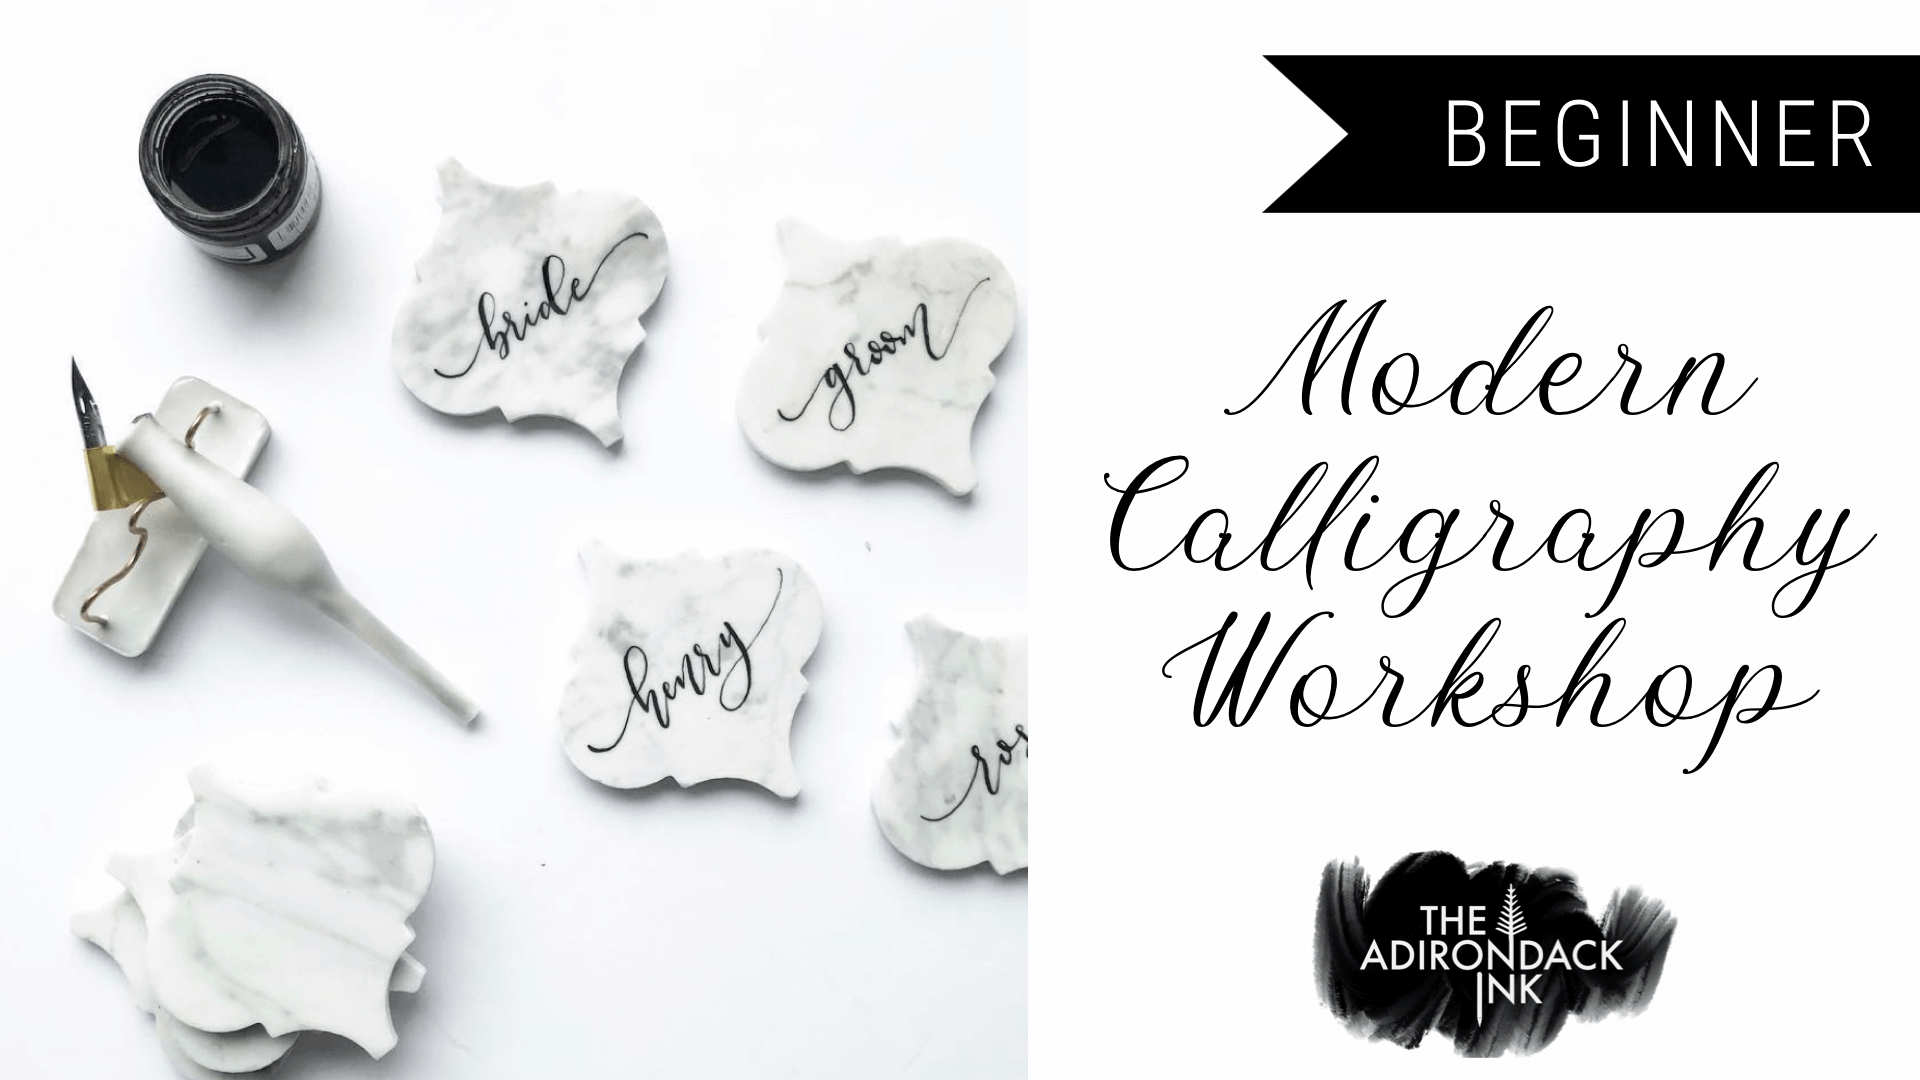 Modern Calligraphy Workshop Picture and Text